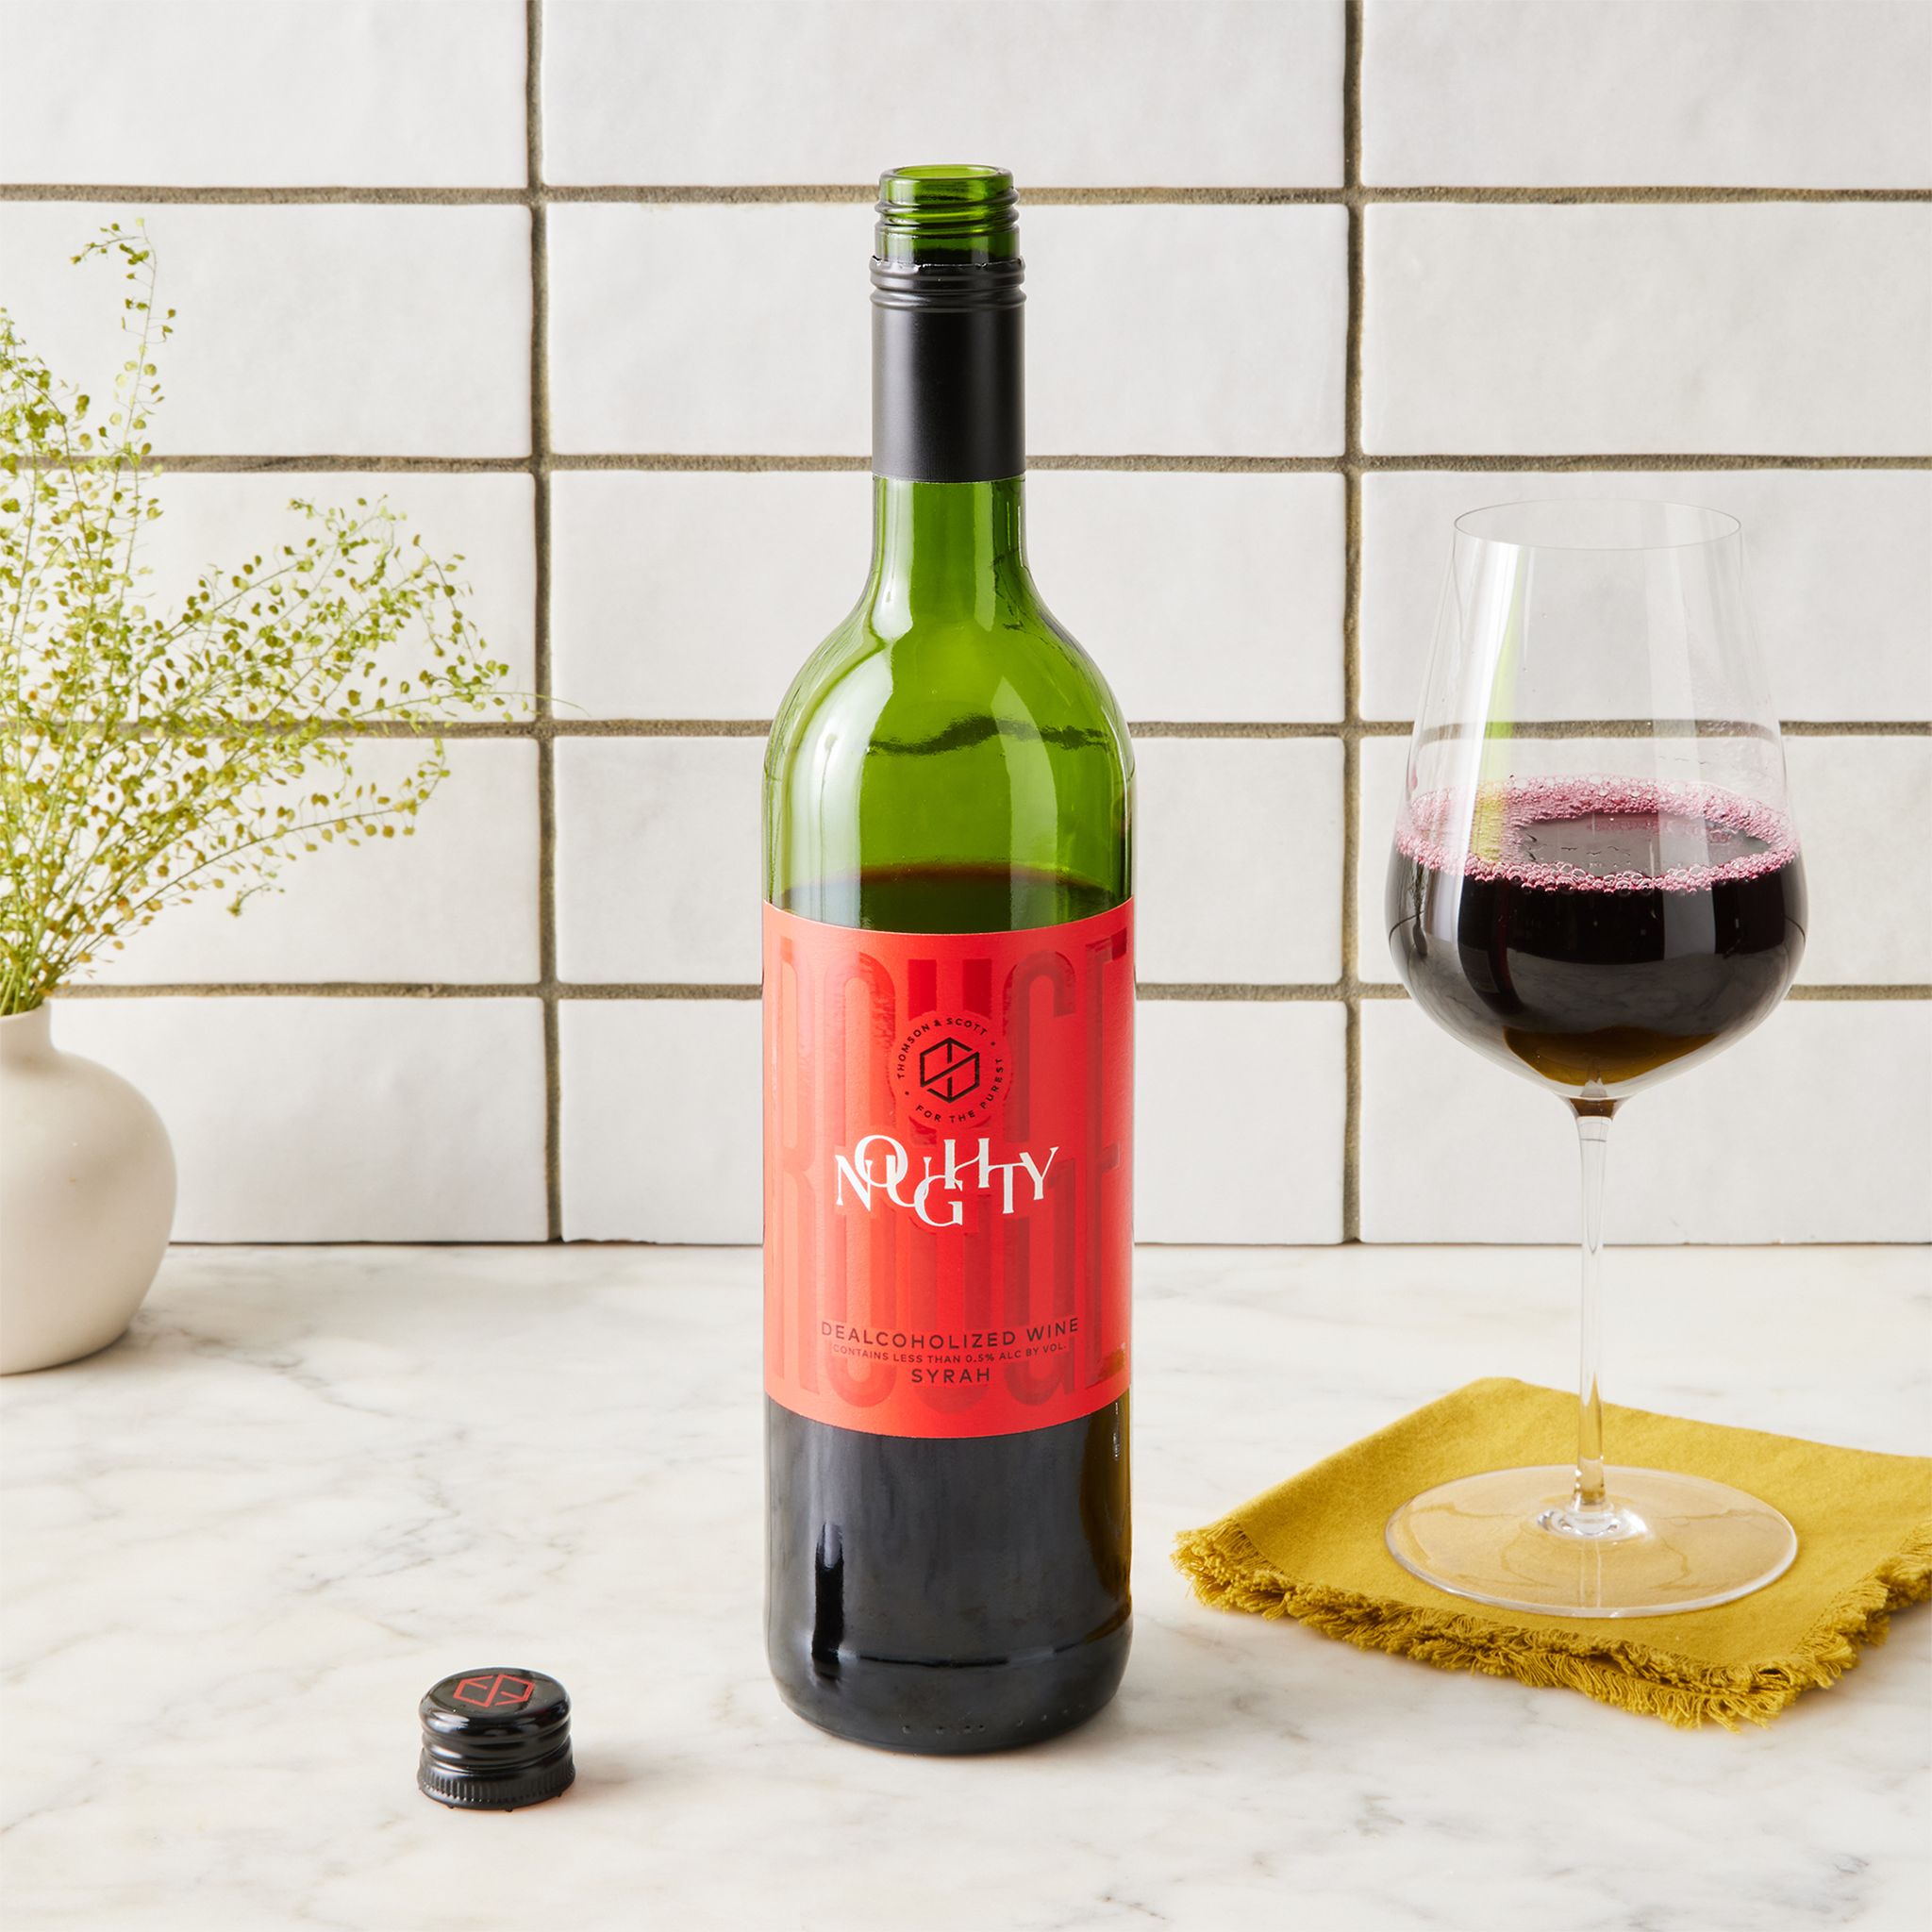 Noughty Low-Alcohol Syrah Red Wine